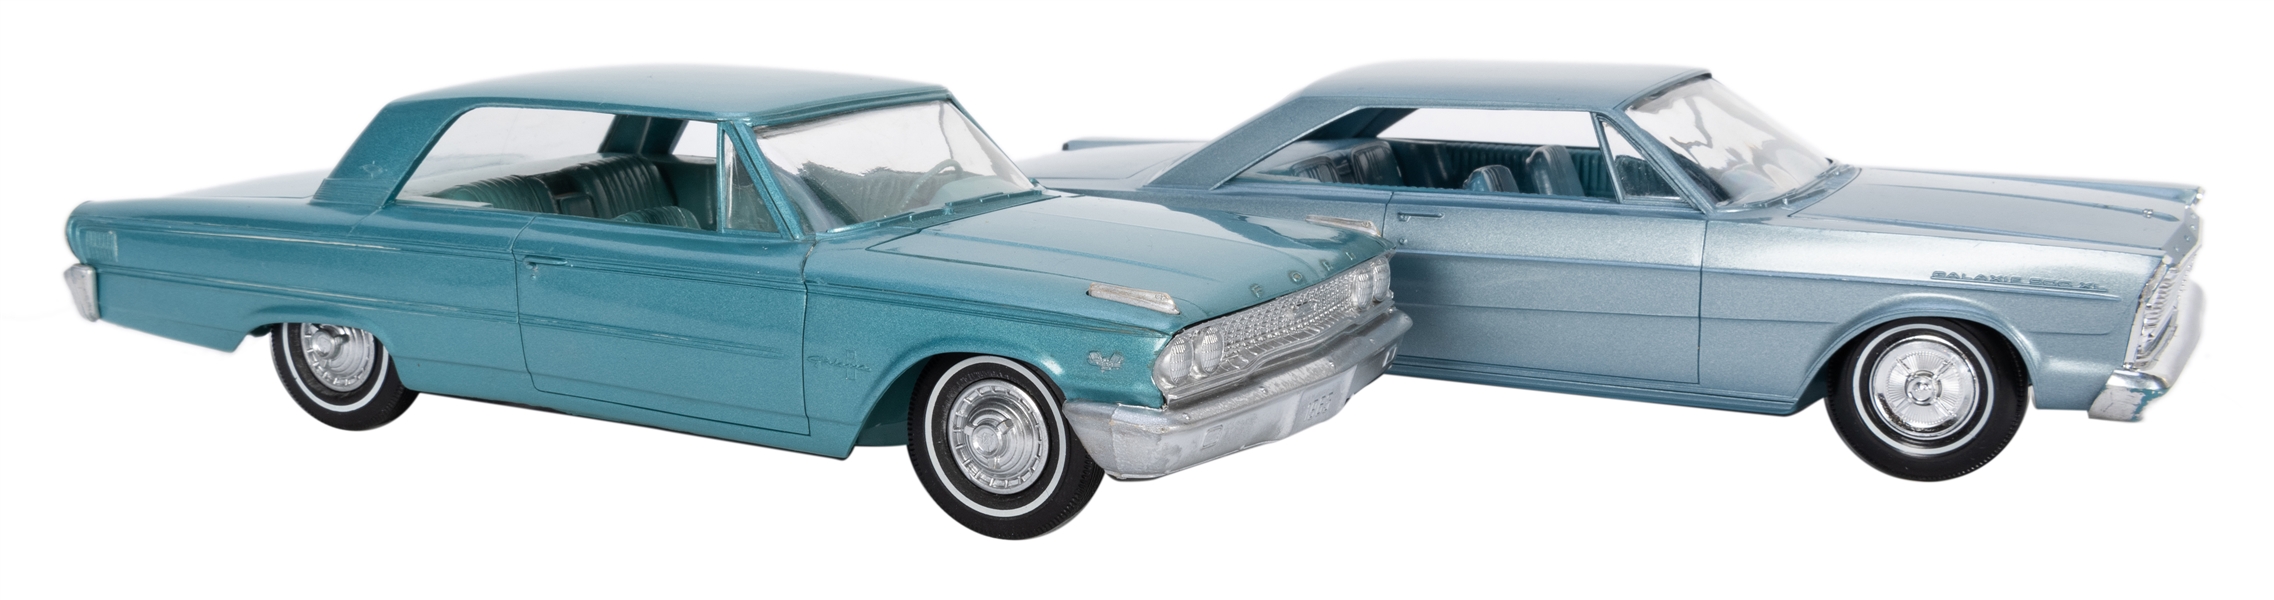  Lot of 2 Ford Galaxie Promo Cars.